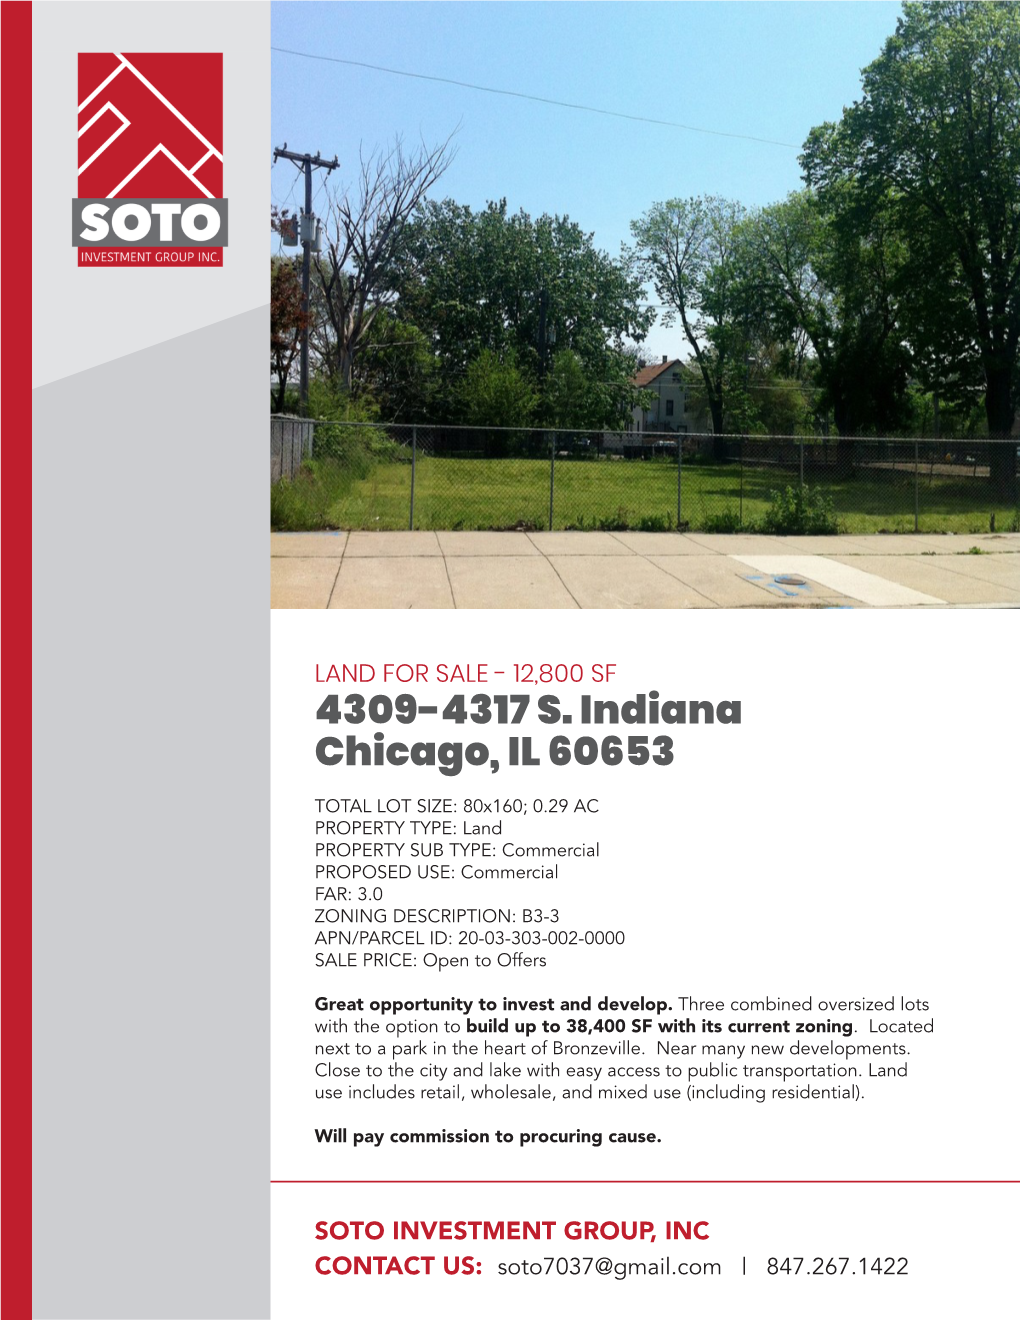 4309-4317 S. Indiana Chicago, IL 60653